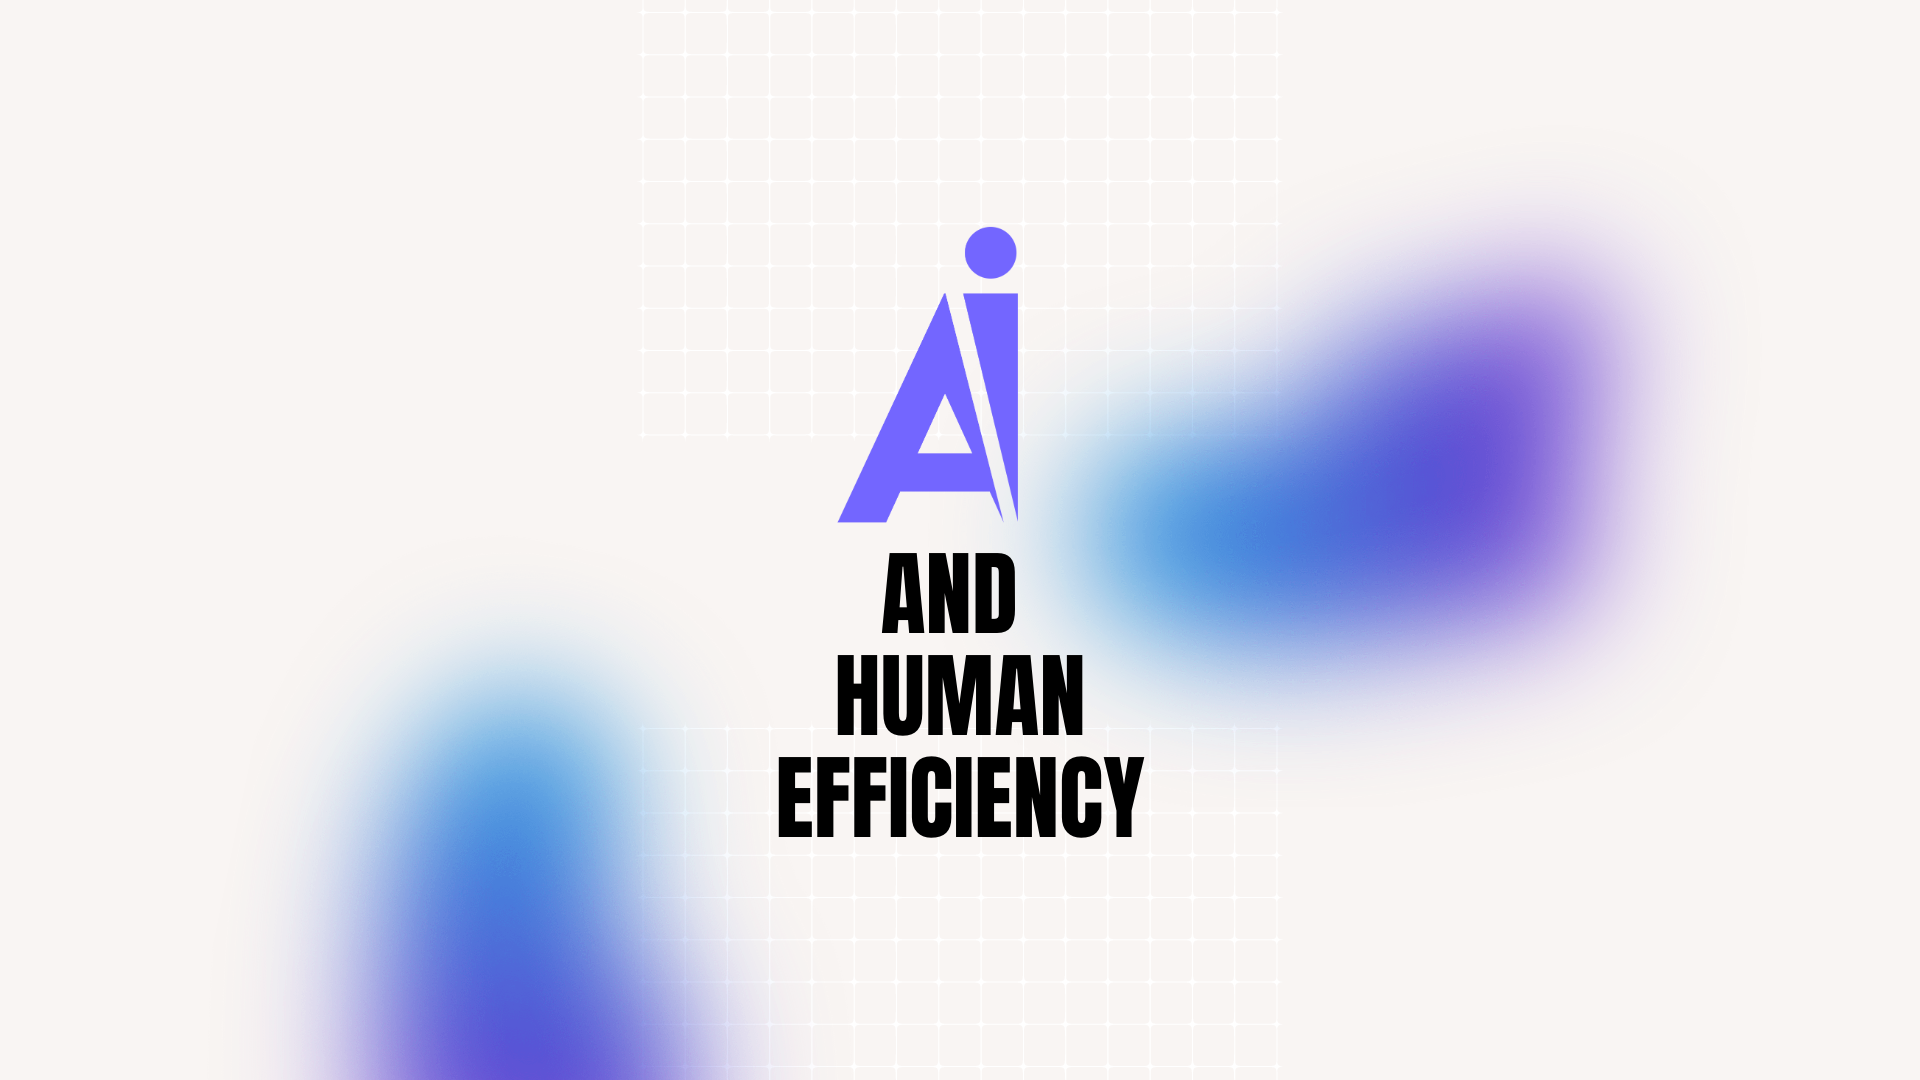 Cover Image for The Future of Human Work: AI and Human Efficiency in Perfect Harmony